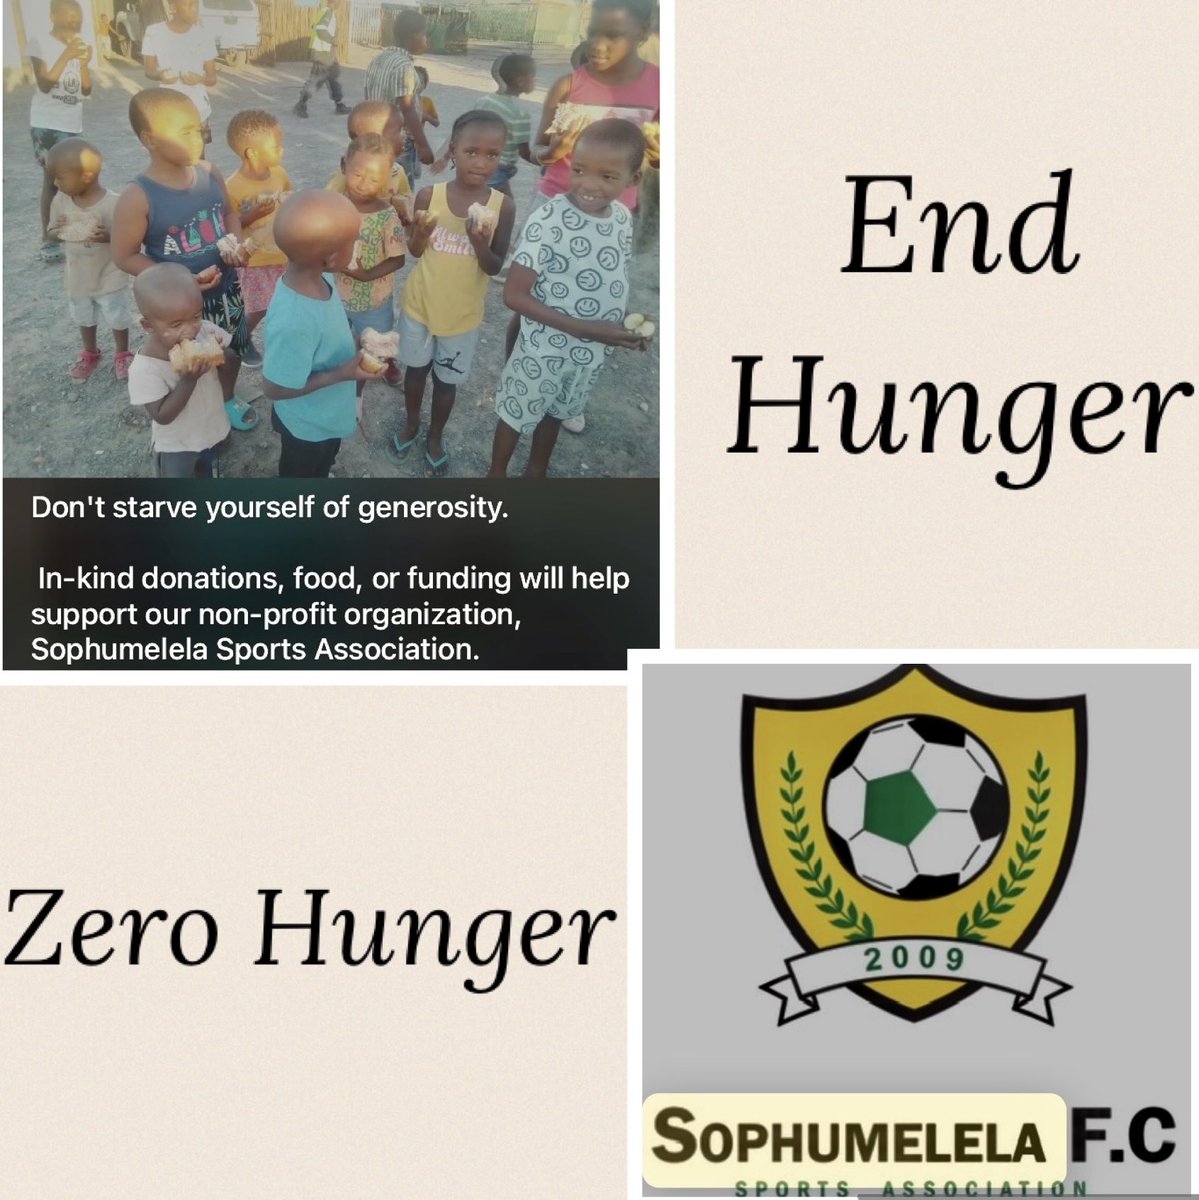 Please do #Support #Sophumelela FC #NGO #Blikkiesdorp #EndHunger #ZeroHunger 

#ForEveryChild a #nutritious #meal #FoodSecurity 
#SDG’s ⁦